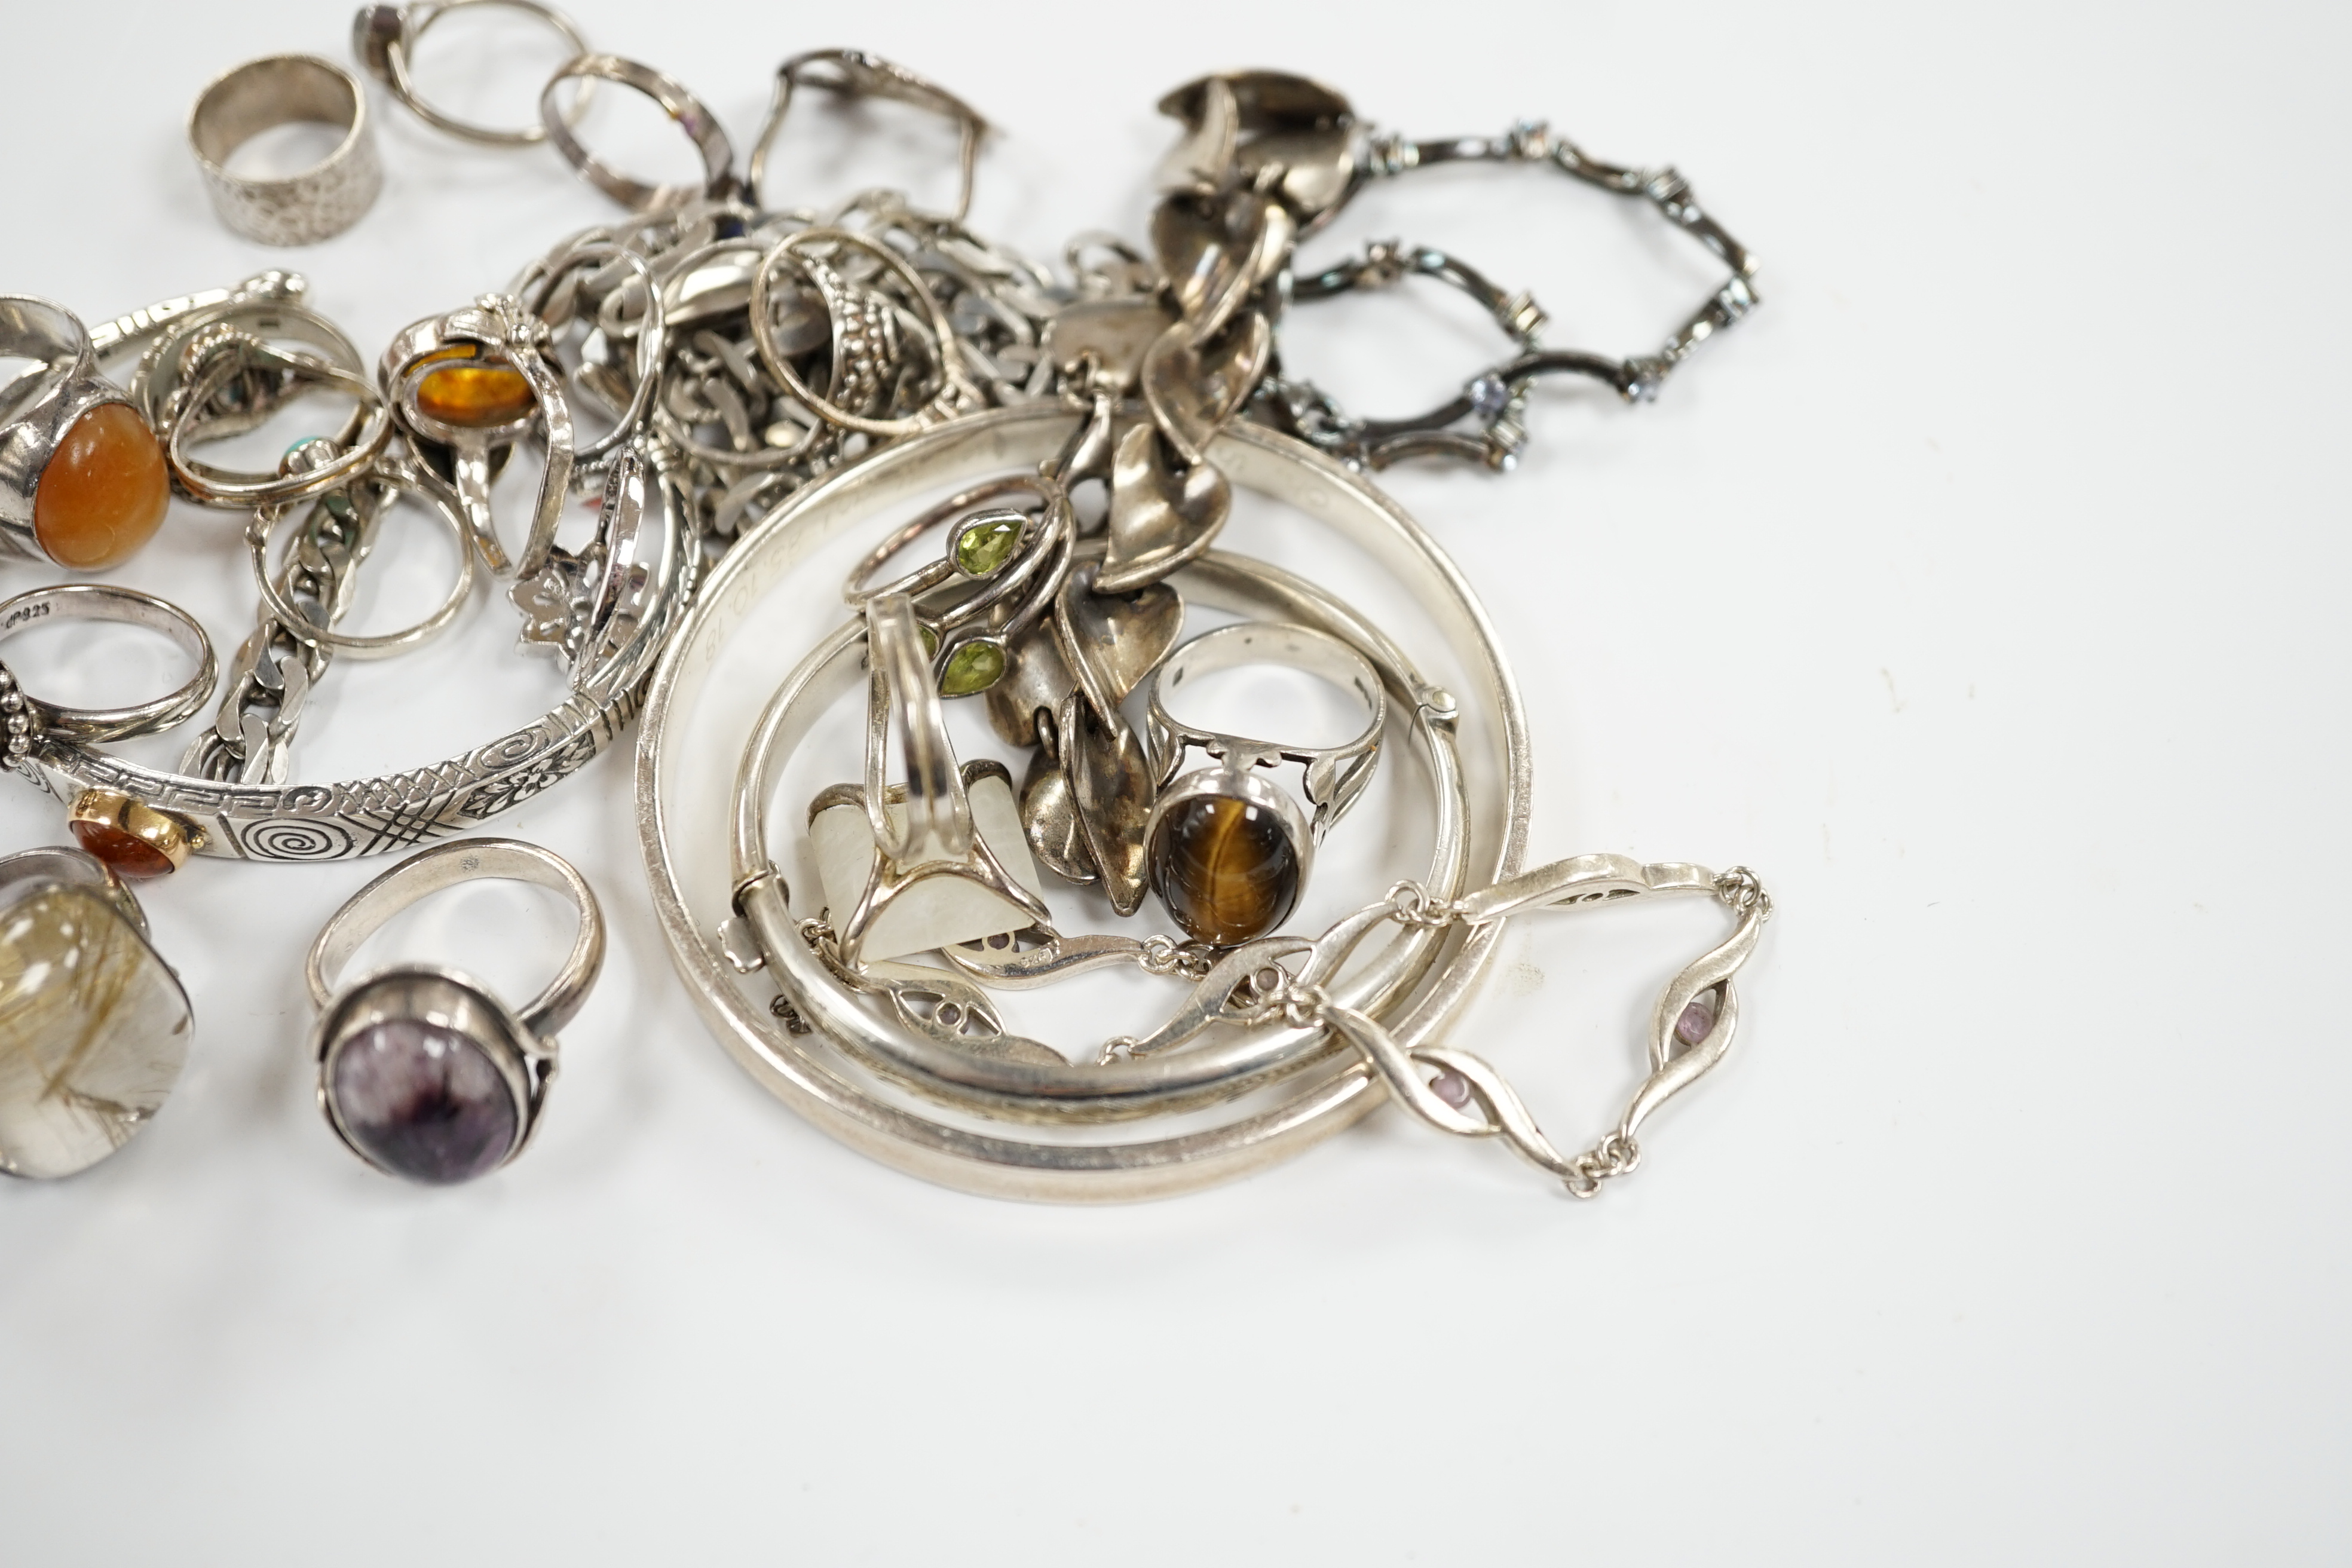 A collection of 925 and white metal rings, bangles and necklaces.